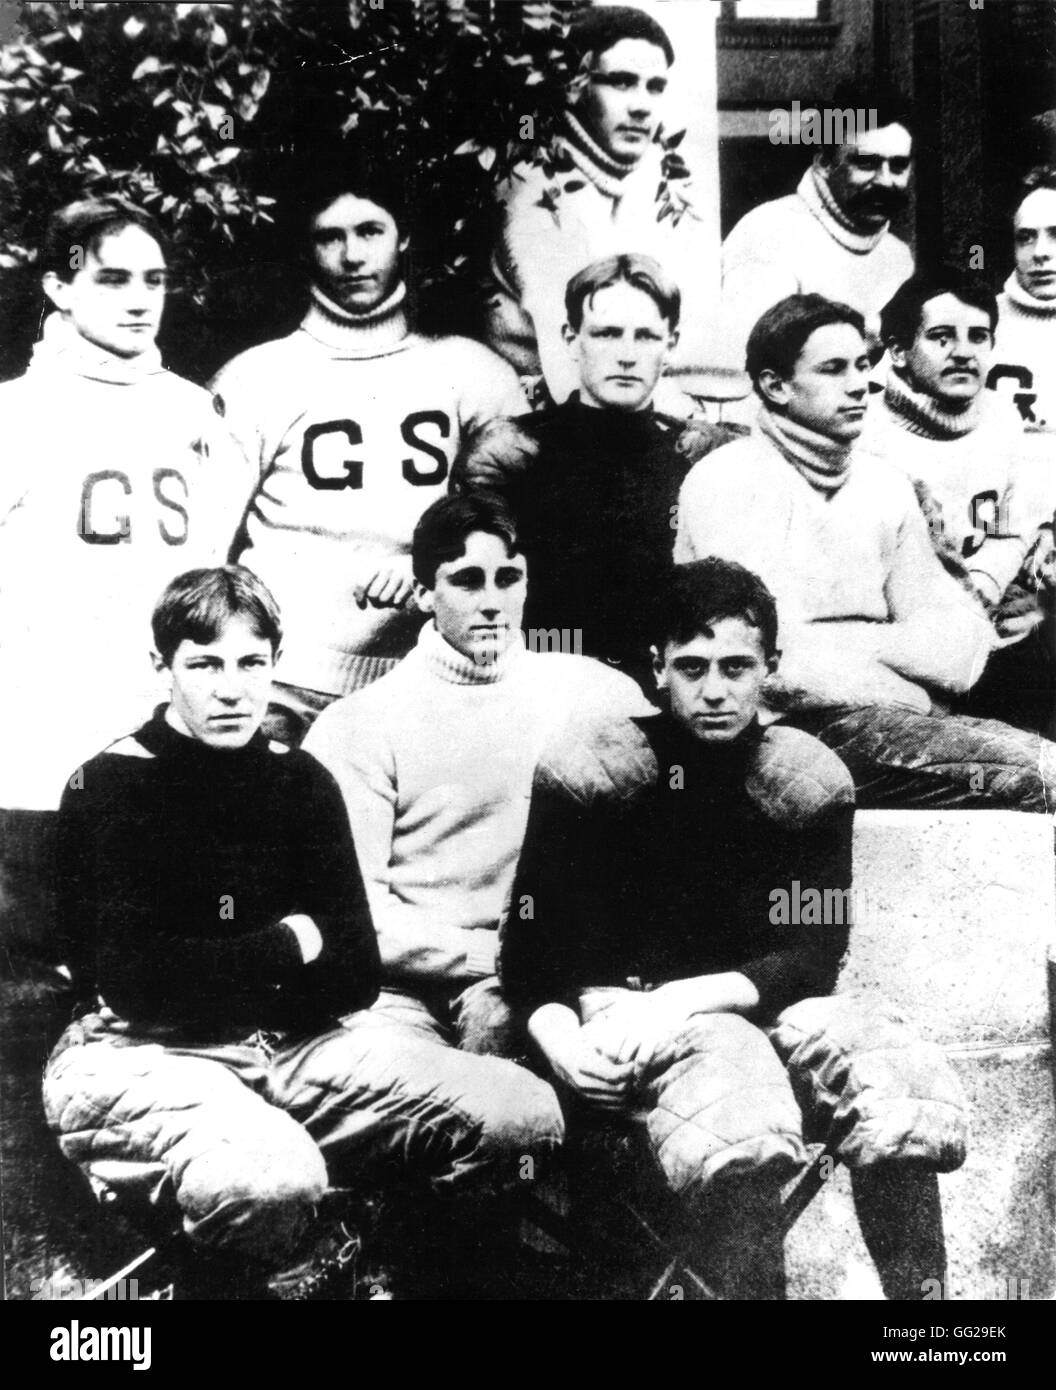 Franklin Delano Roosevelt (in the middle, first row), with the football team of his school, Groton prep school. Early 20th century United States Stock Photo